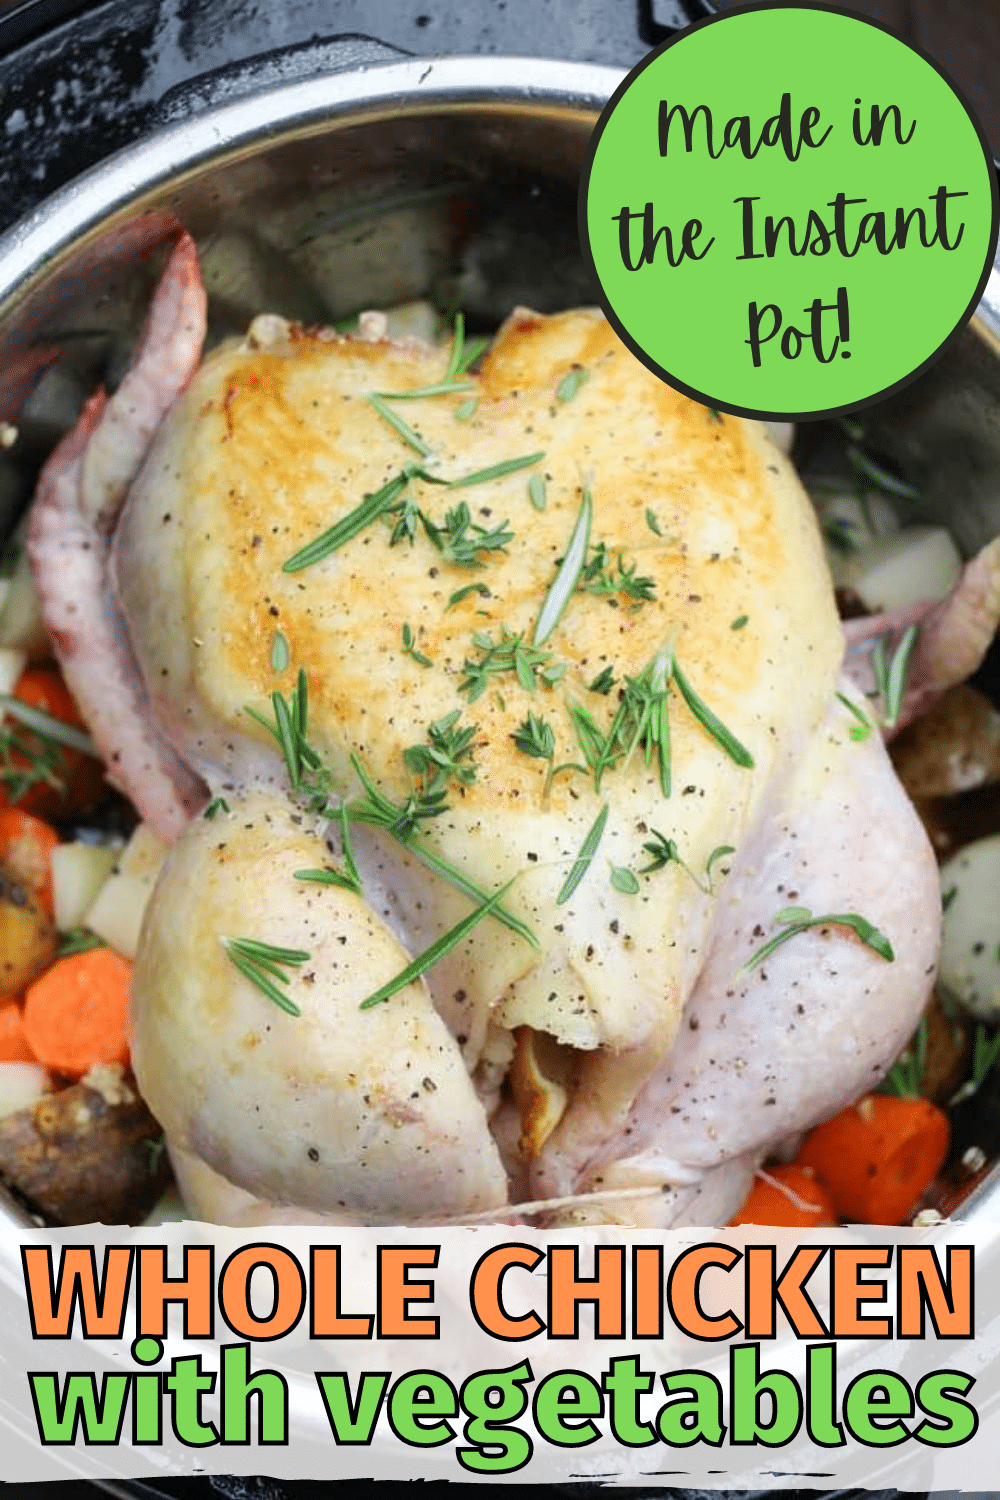 Instant Pot Whole Chicken with Vegetables is a complete meal that takes very little effort to prepare. Your family will love it! #instantpot #pressurecooker #wholechicken #dinner via @wondermomwannab